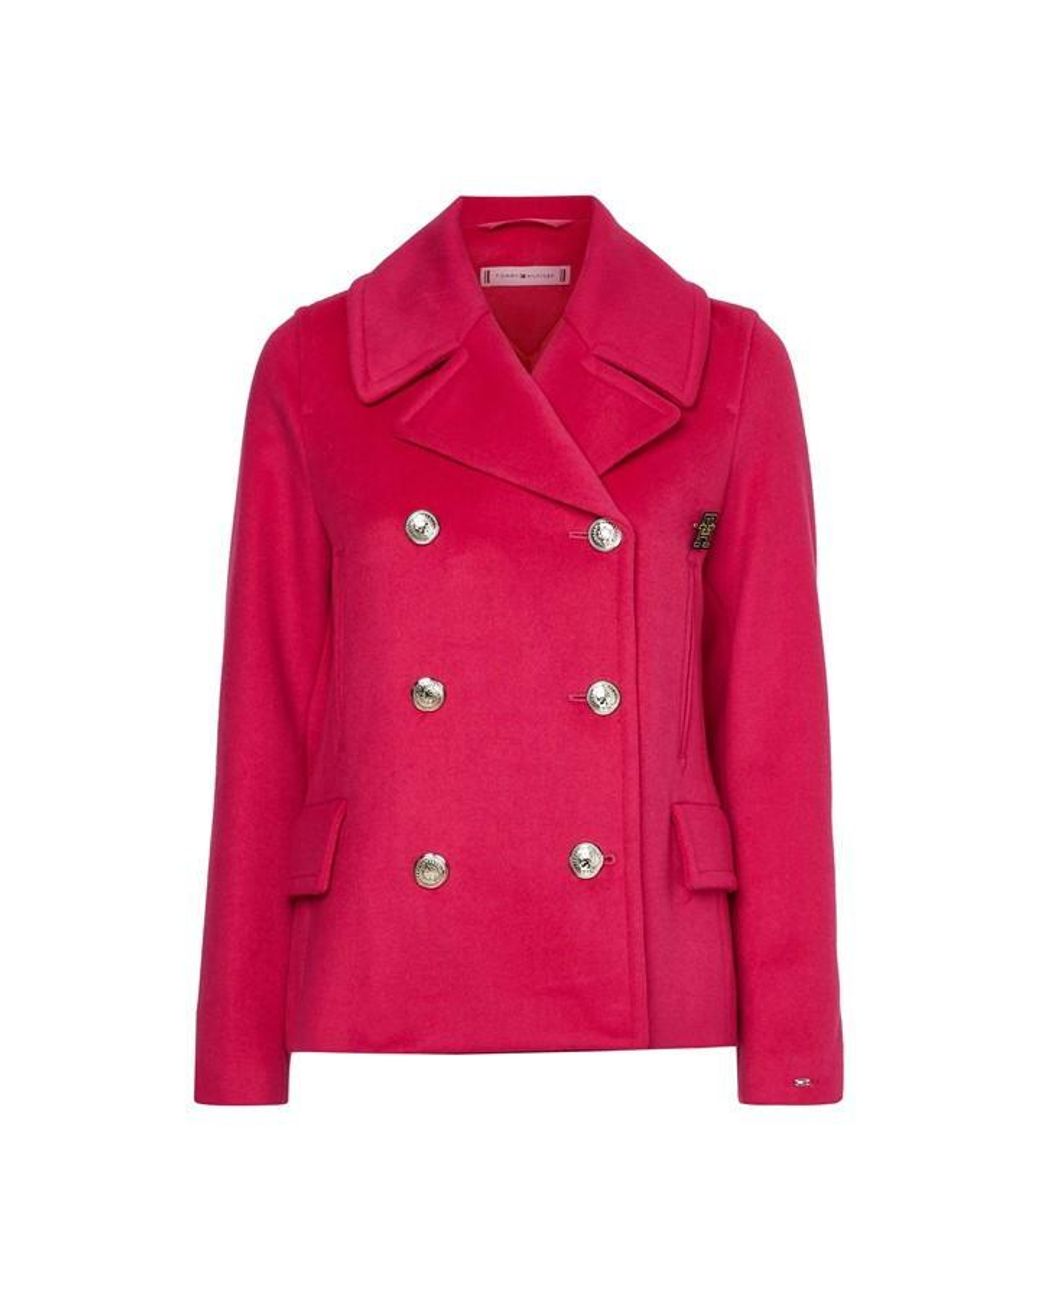 Tommy Hilfiger Wool Blend Db Peacoat in Pink | Lyst UK